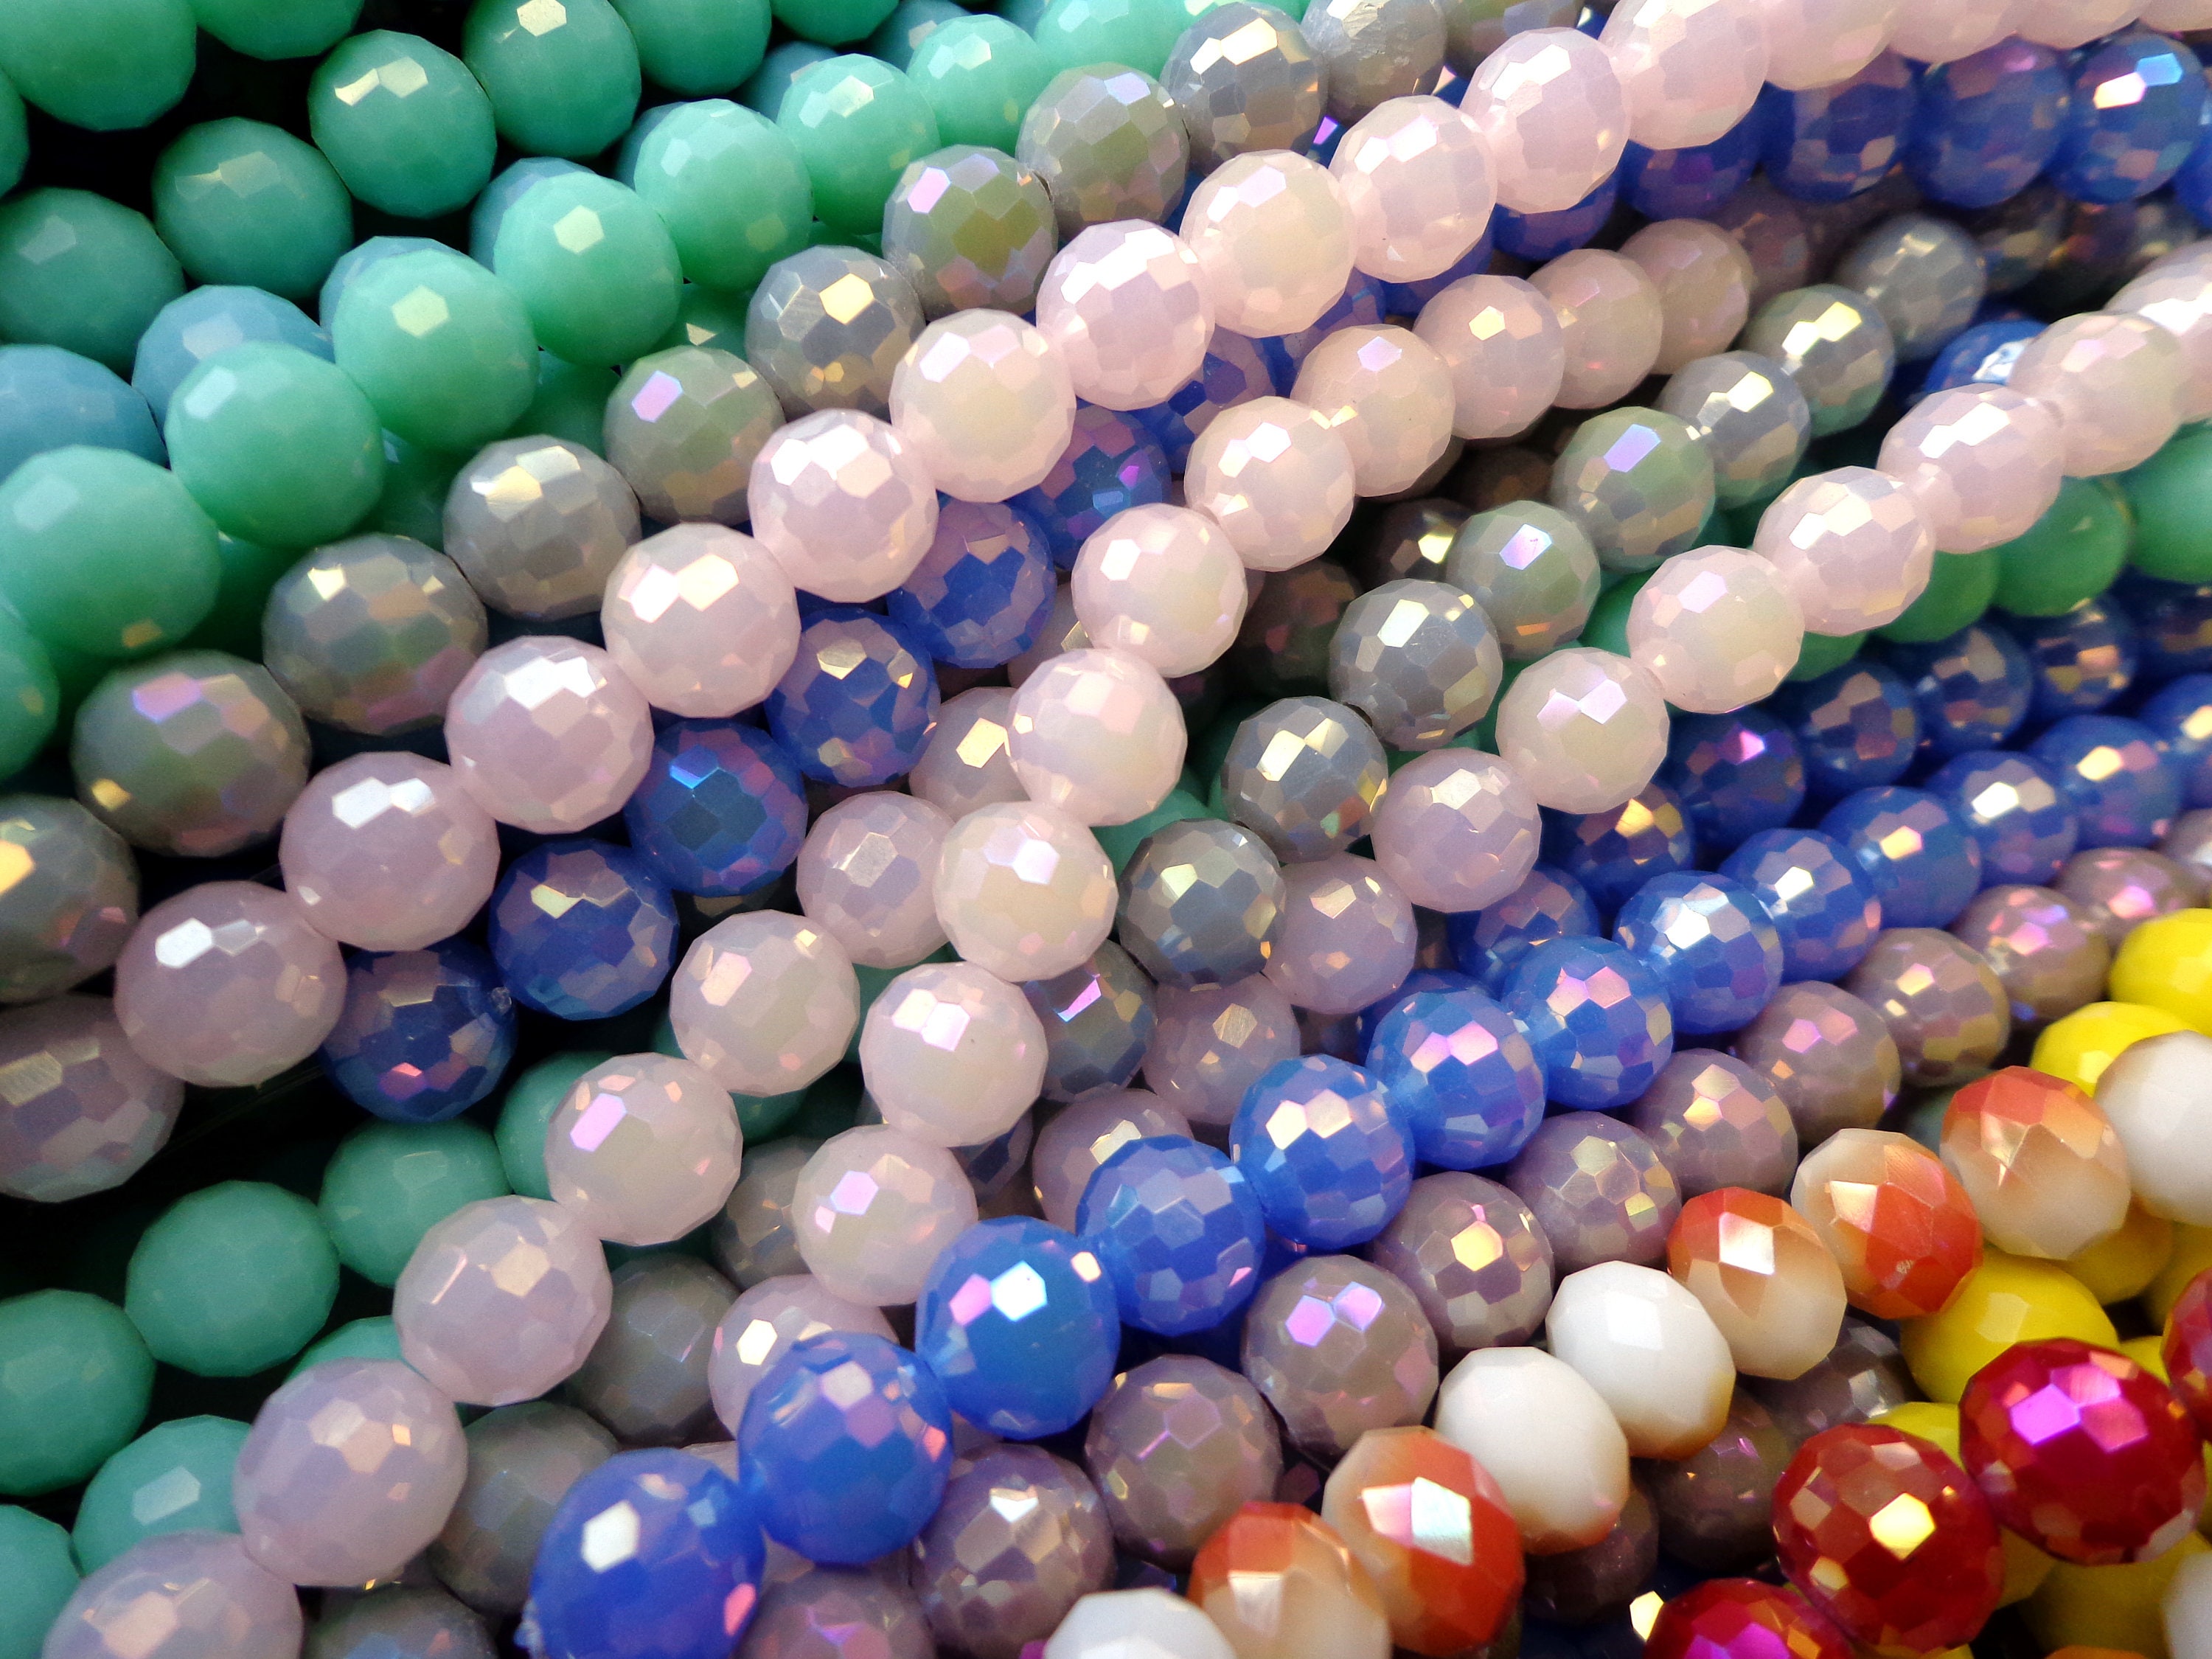 Bulk 900 Beads Multi-color Crystal 4mm Rondelle Chinese Crystal Beads  Spacer Beads Glass Beads, Wholesale Price. Great for JEWELRY Making -   Israel